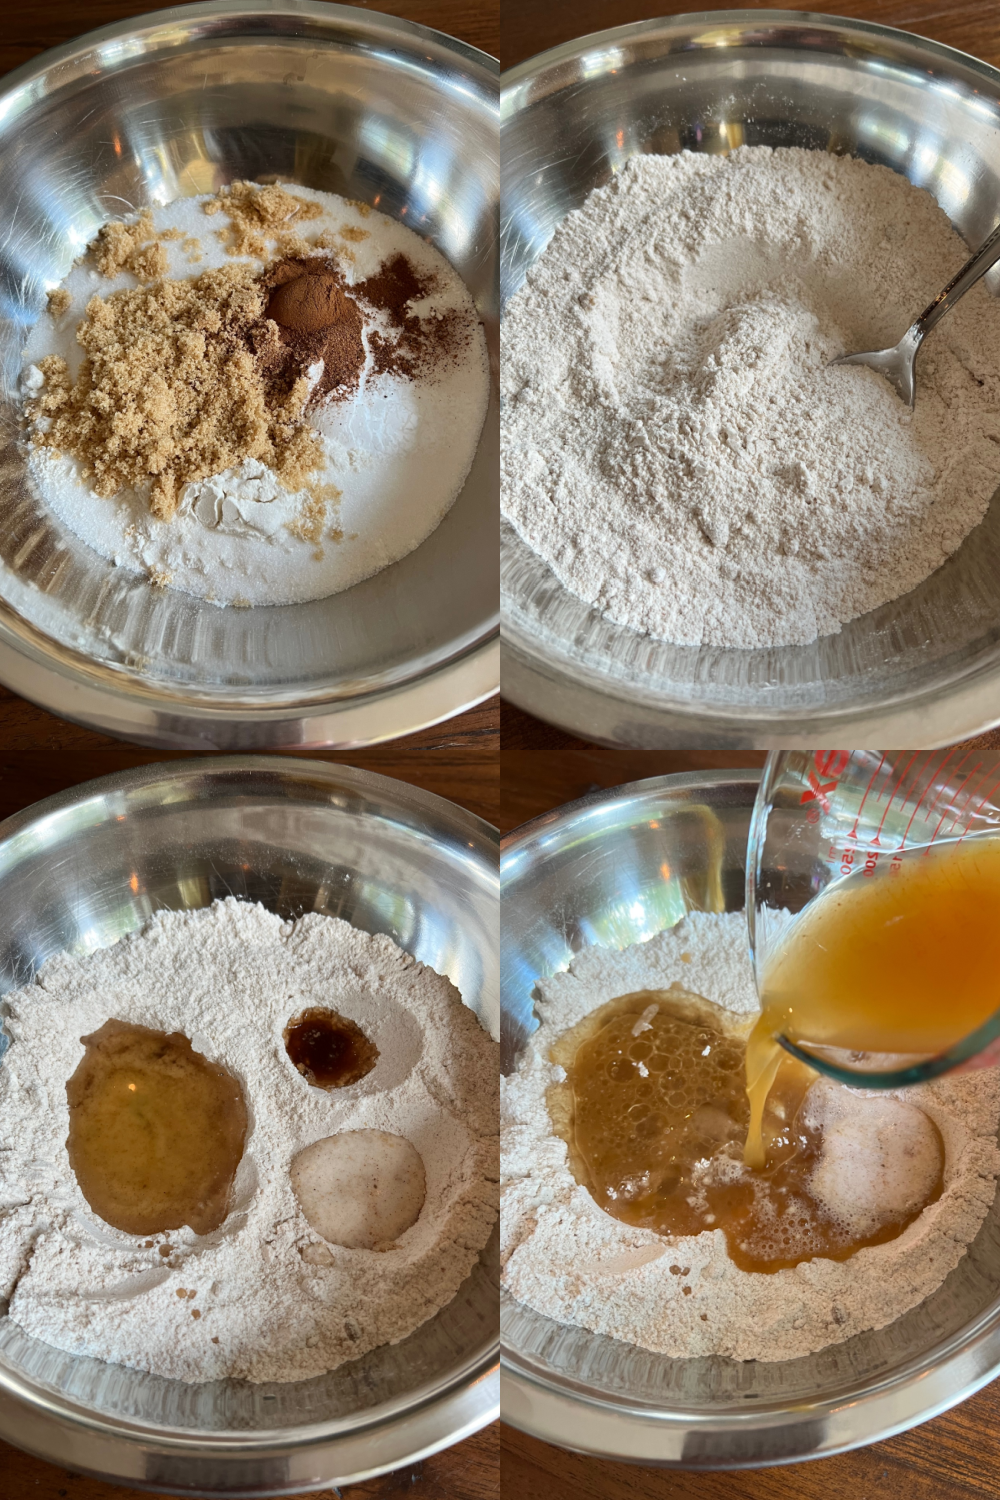 This is a 4 photo collage showing the batter being made in a large bowl.